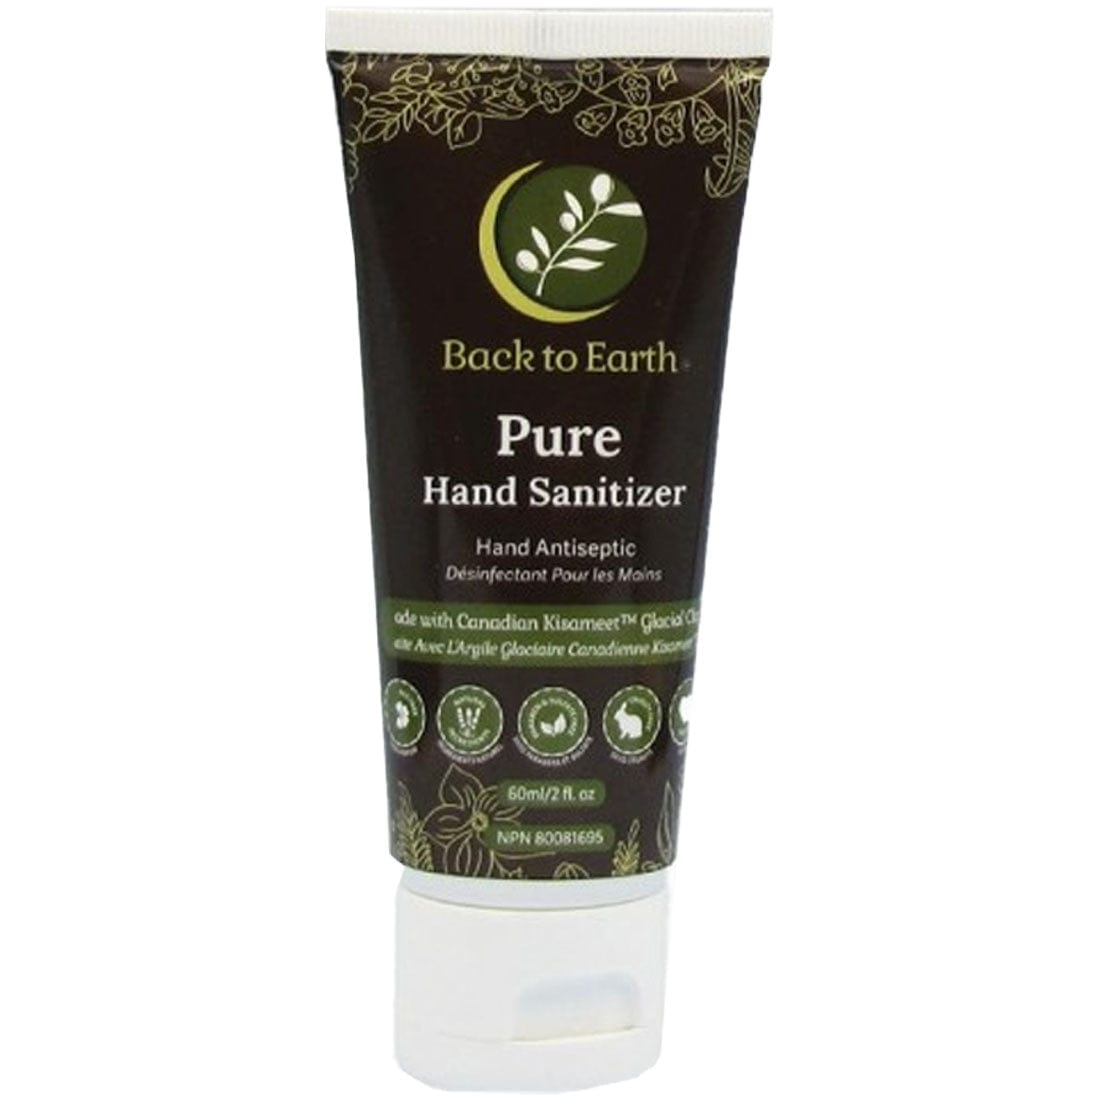 Back To Earth Pure Hand Sanitizer, 60ml, Clearance 80% Off, Final Sale